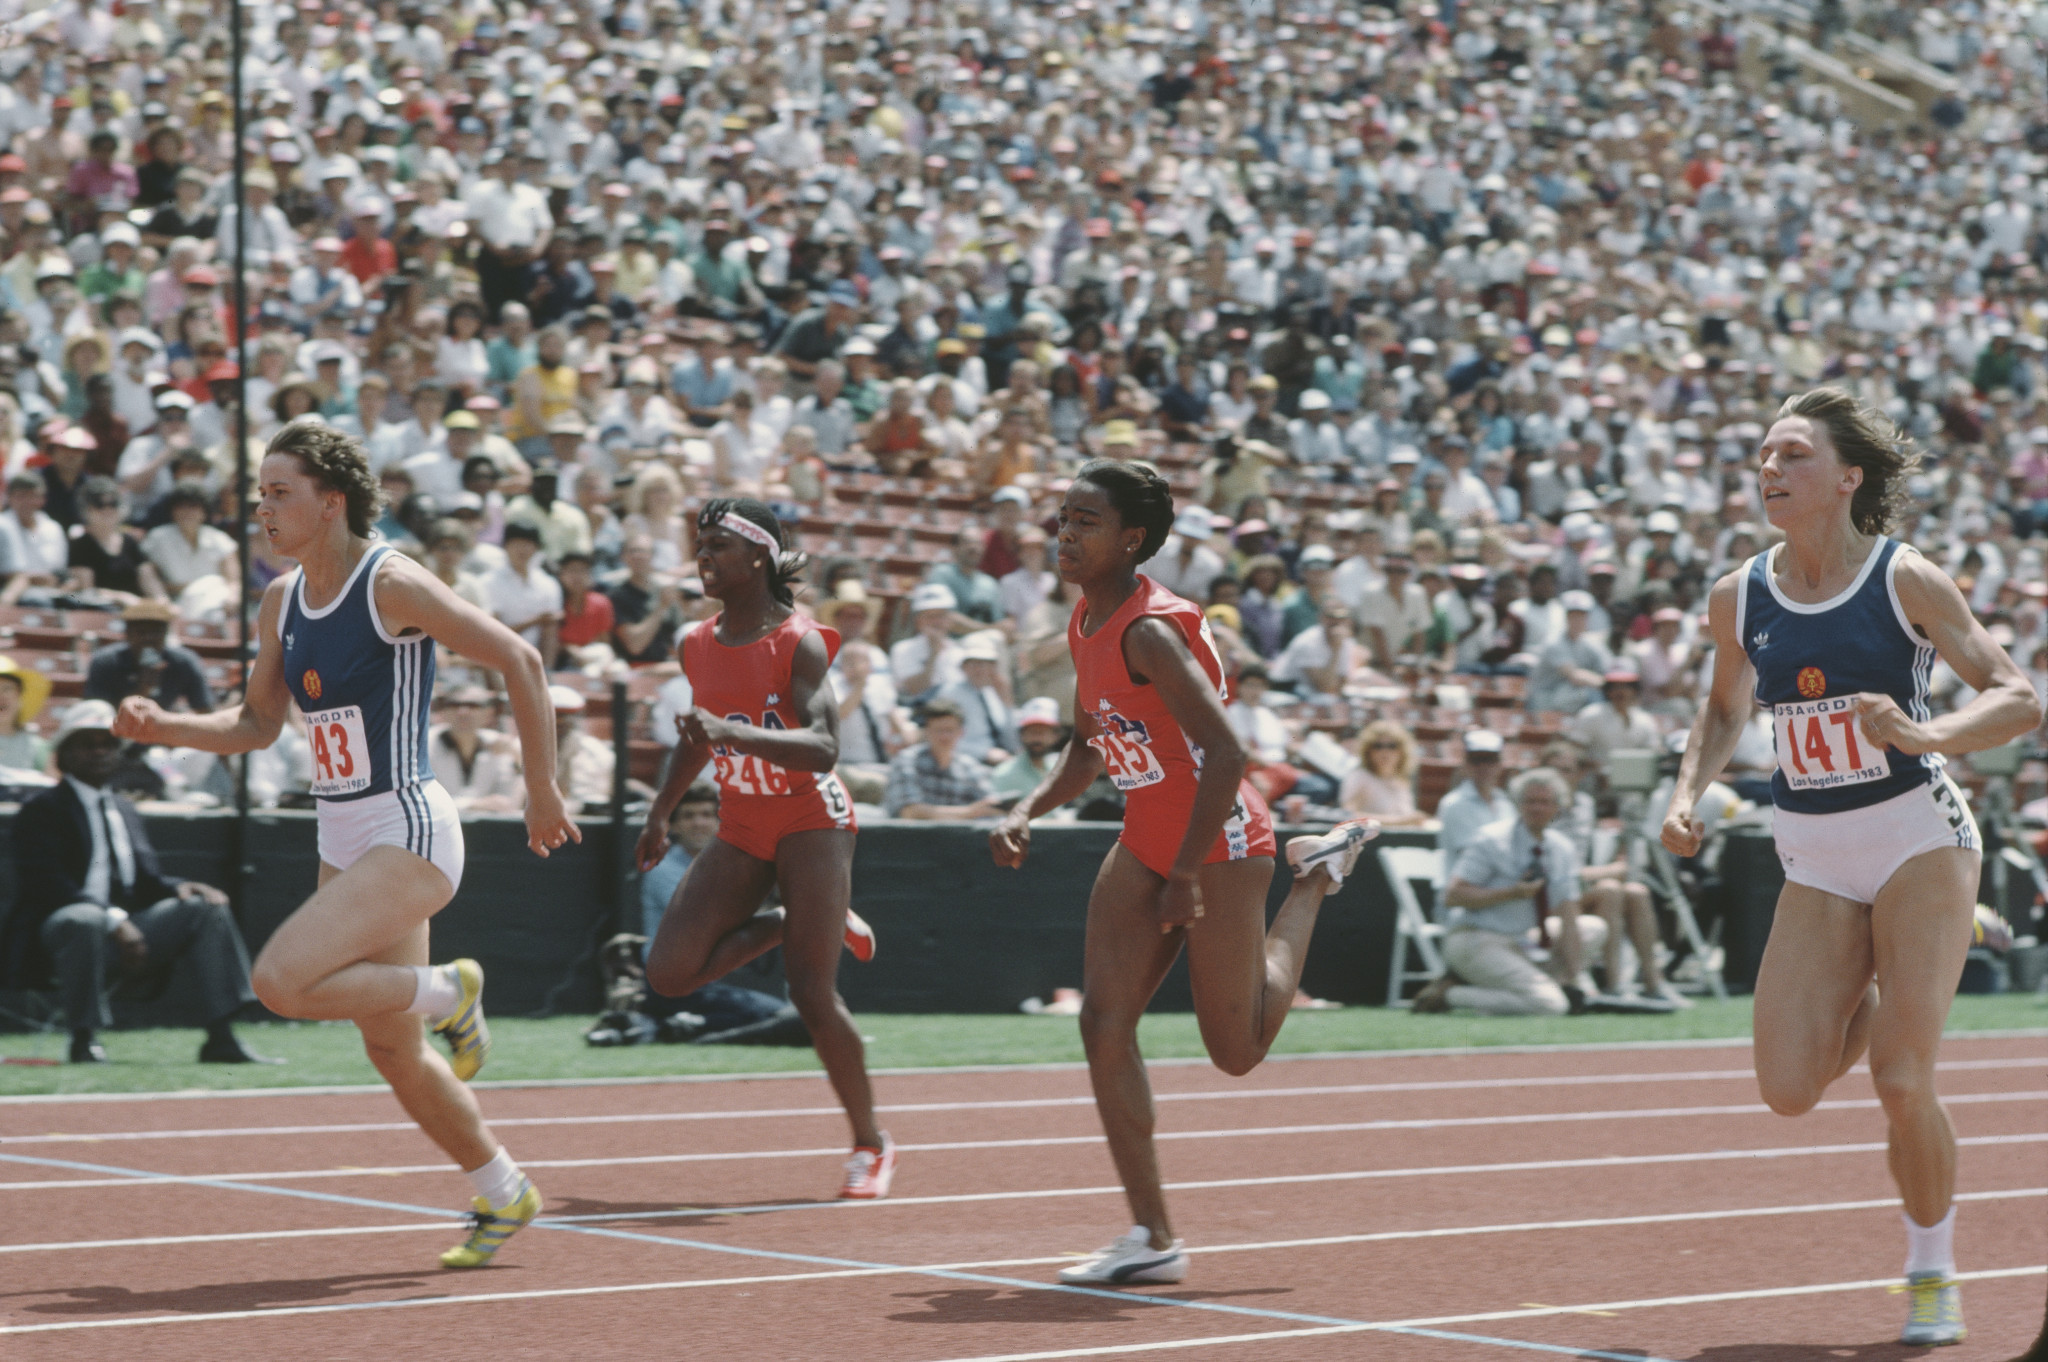 East Germany's athletes raced at the Los Angeles Coliseum in 1983 ©Getty Images